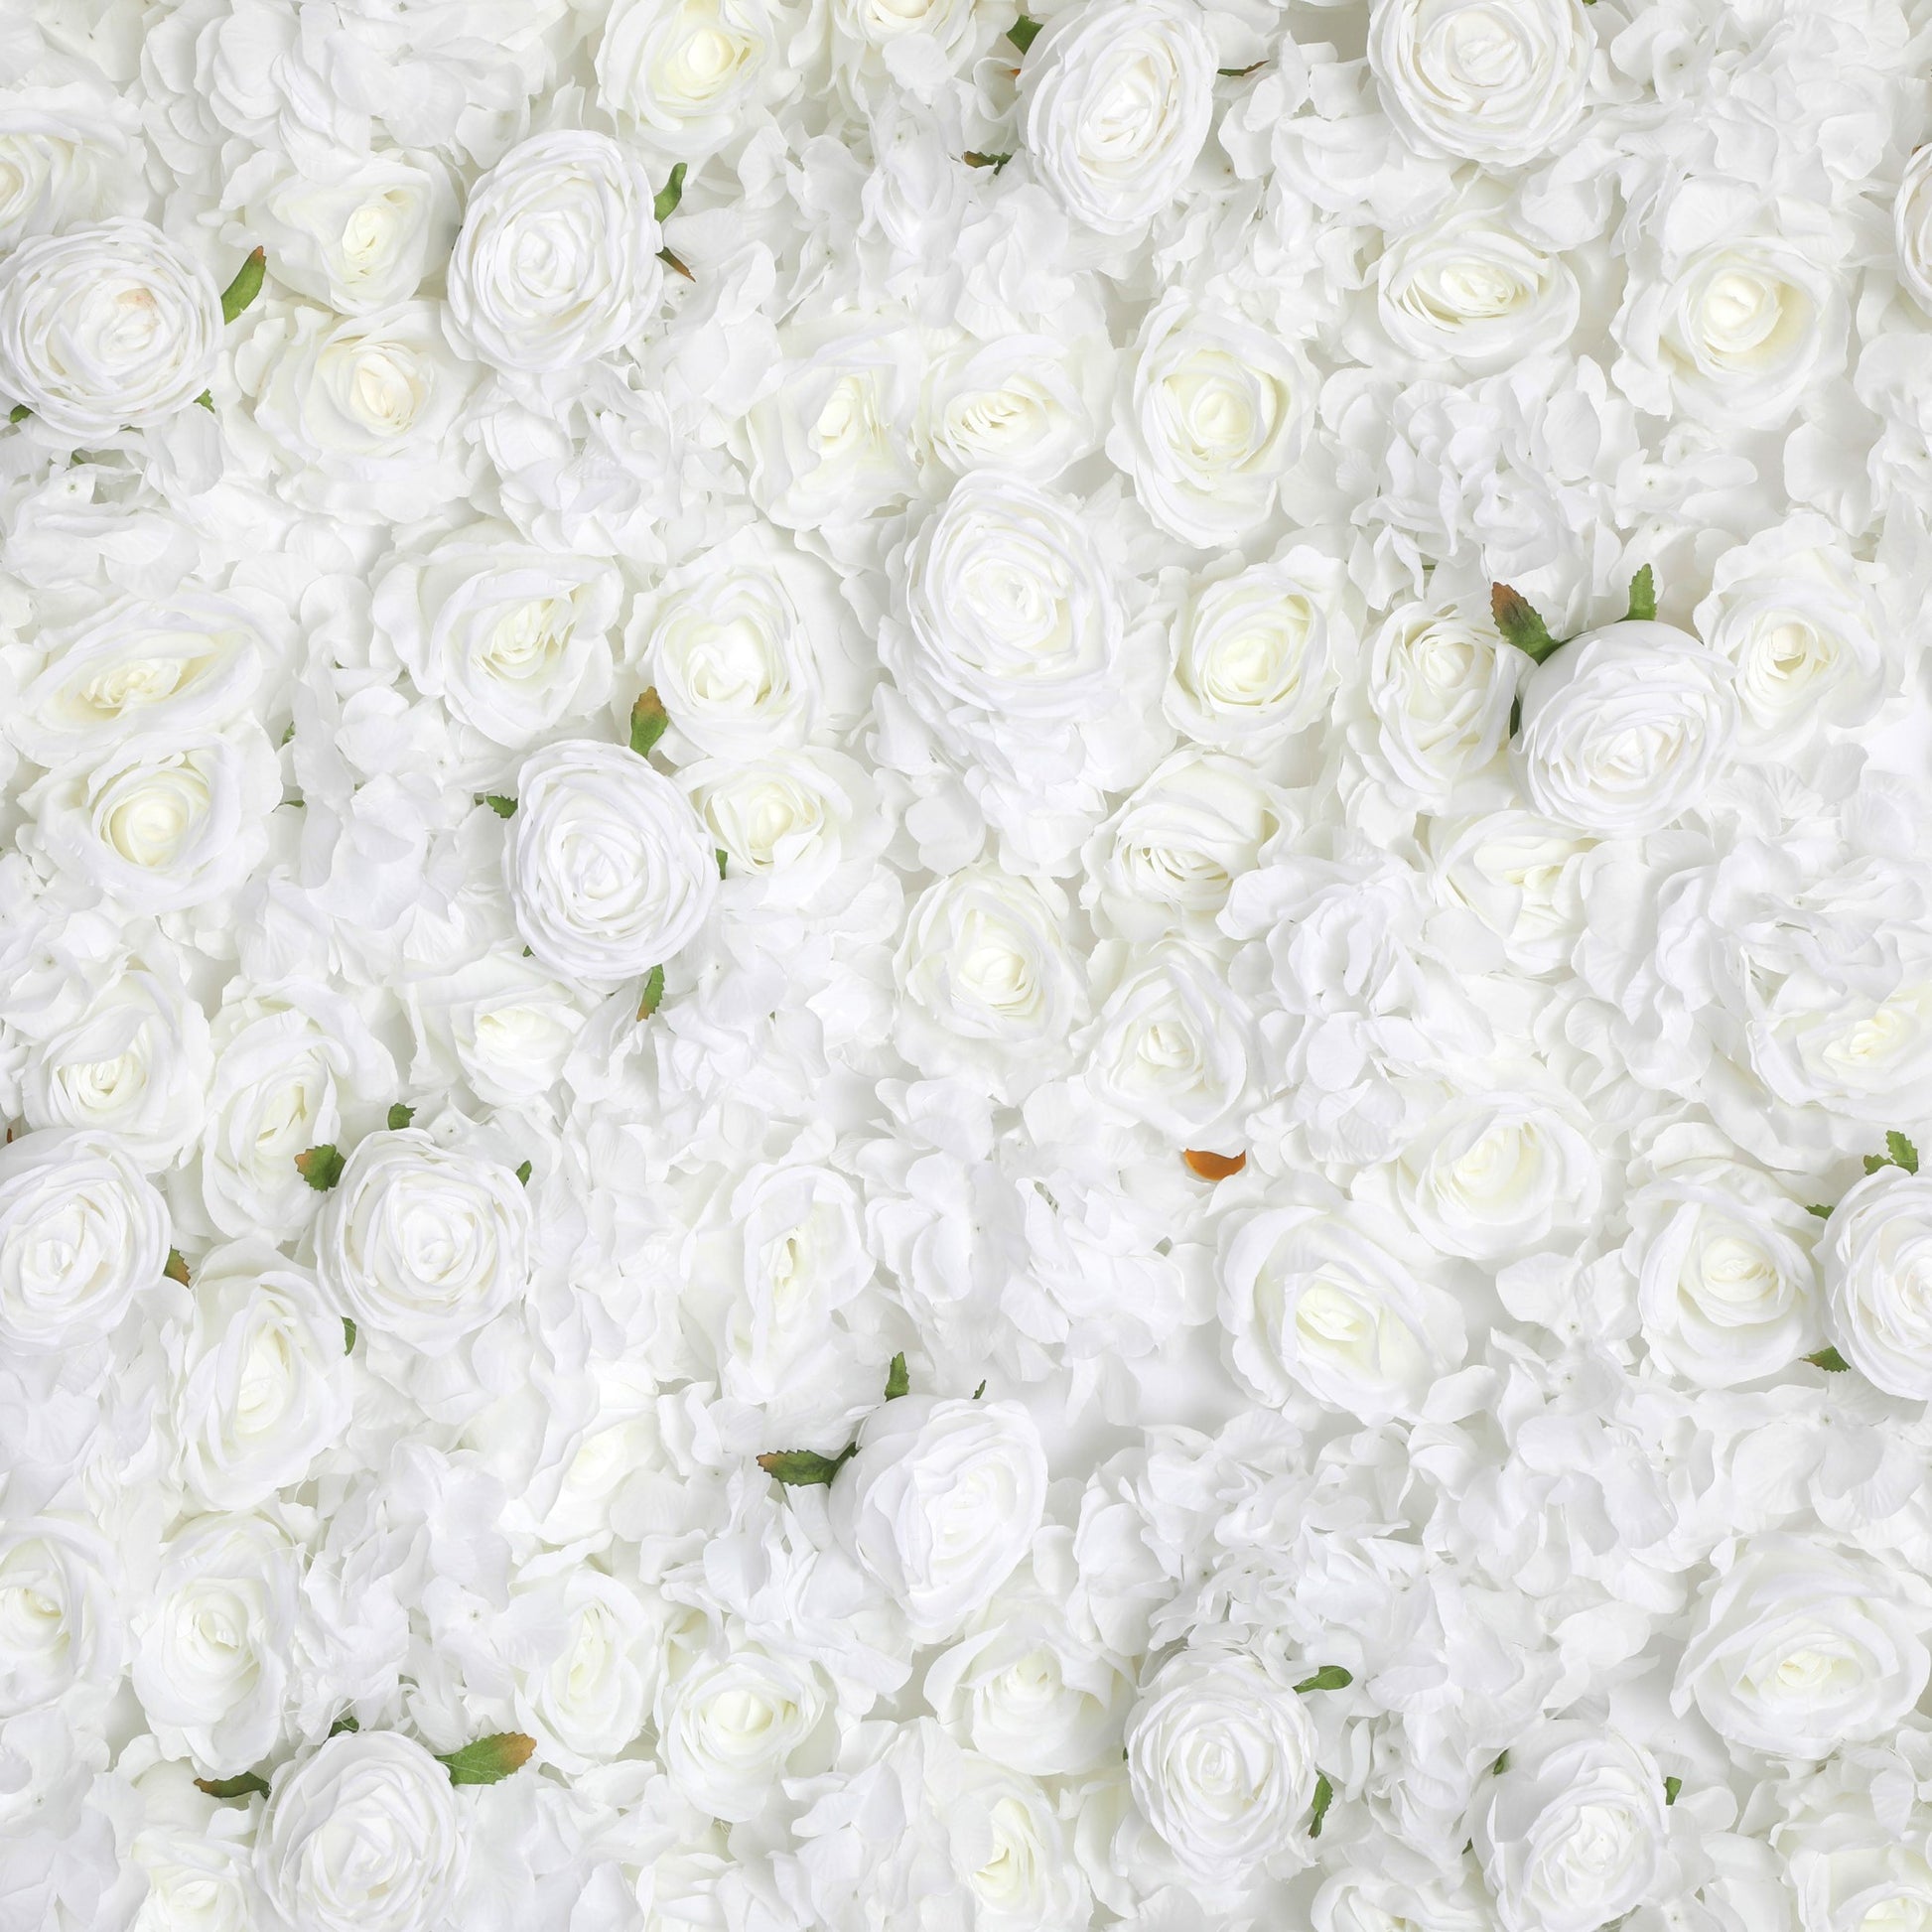 Roll Up Flower Wall Backdrop 8ft x 4ft - White